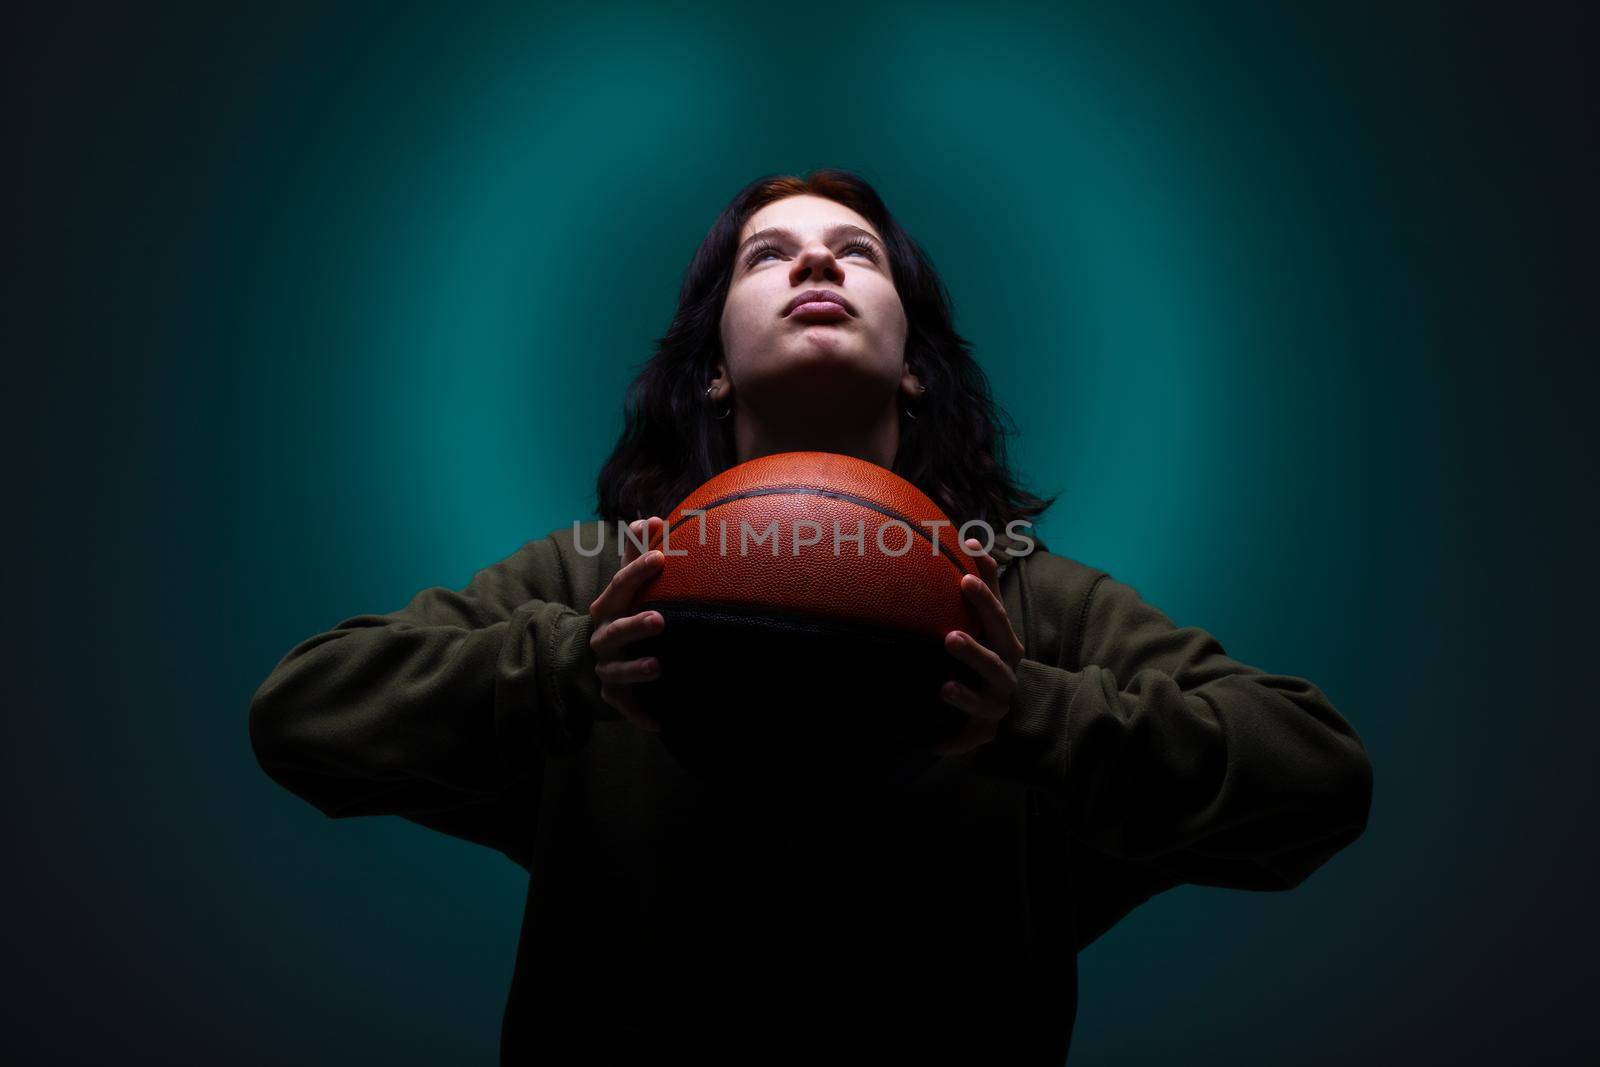 Teenage girl with basketball. Studio portrait with neon blue colored background.